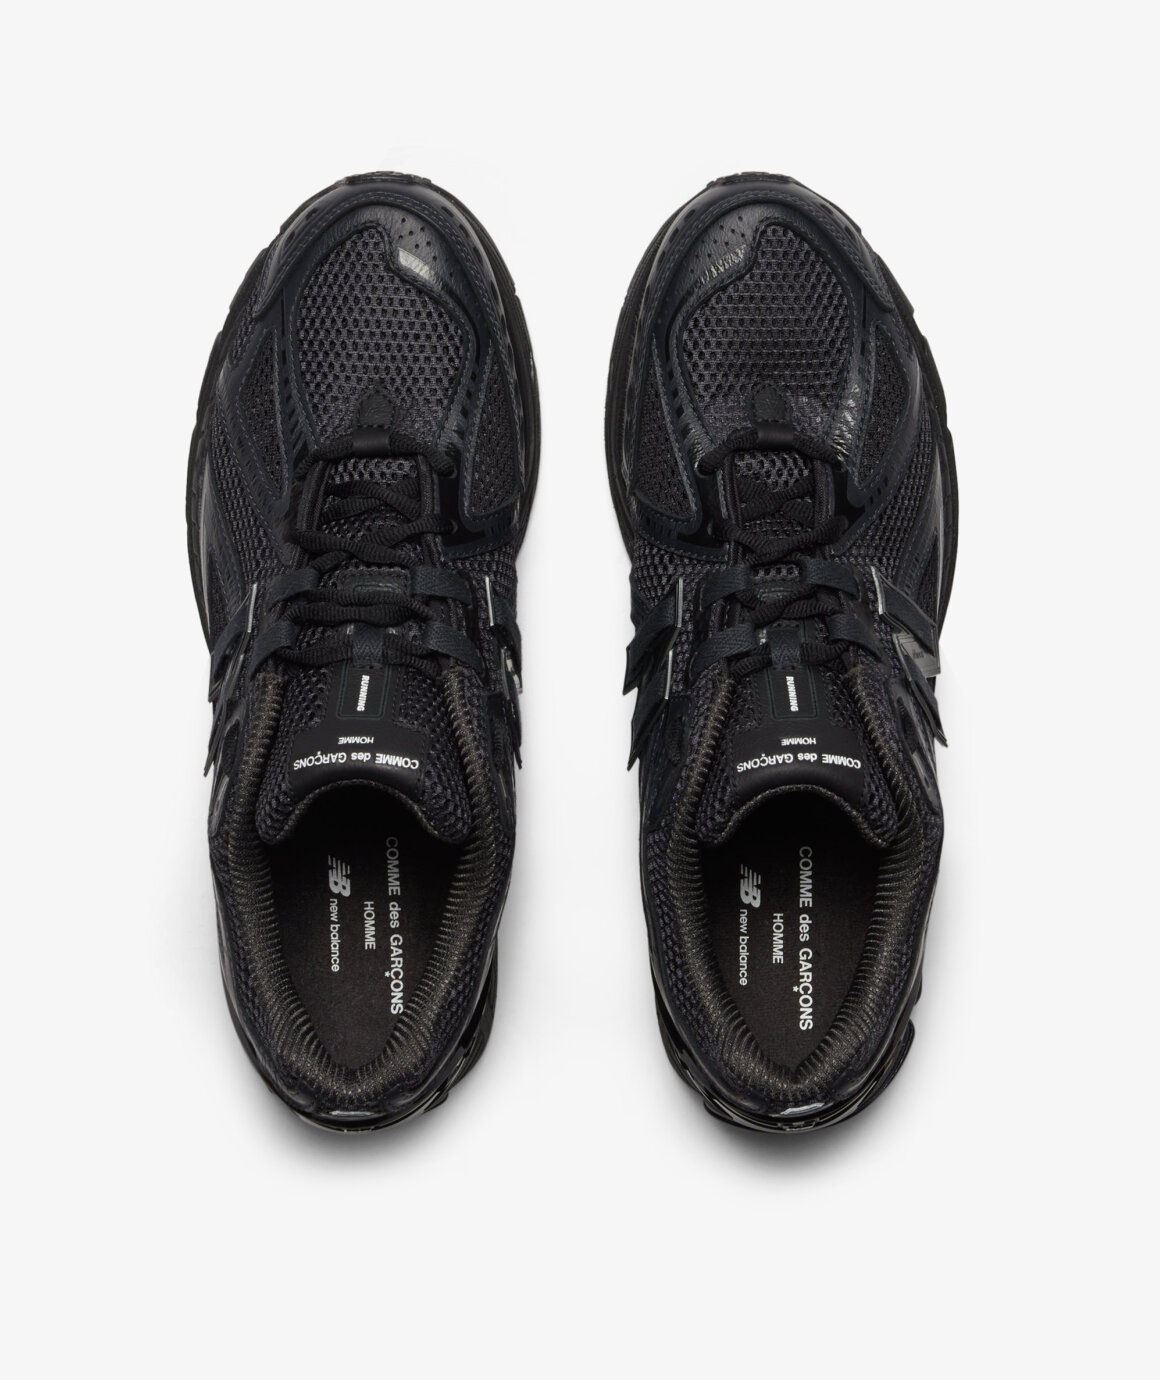 Norse Store | Shipping Worldwide - Comme Des Garcons Homme CDGH x NB ...